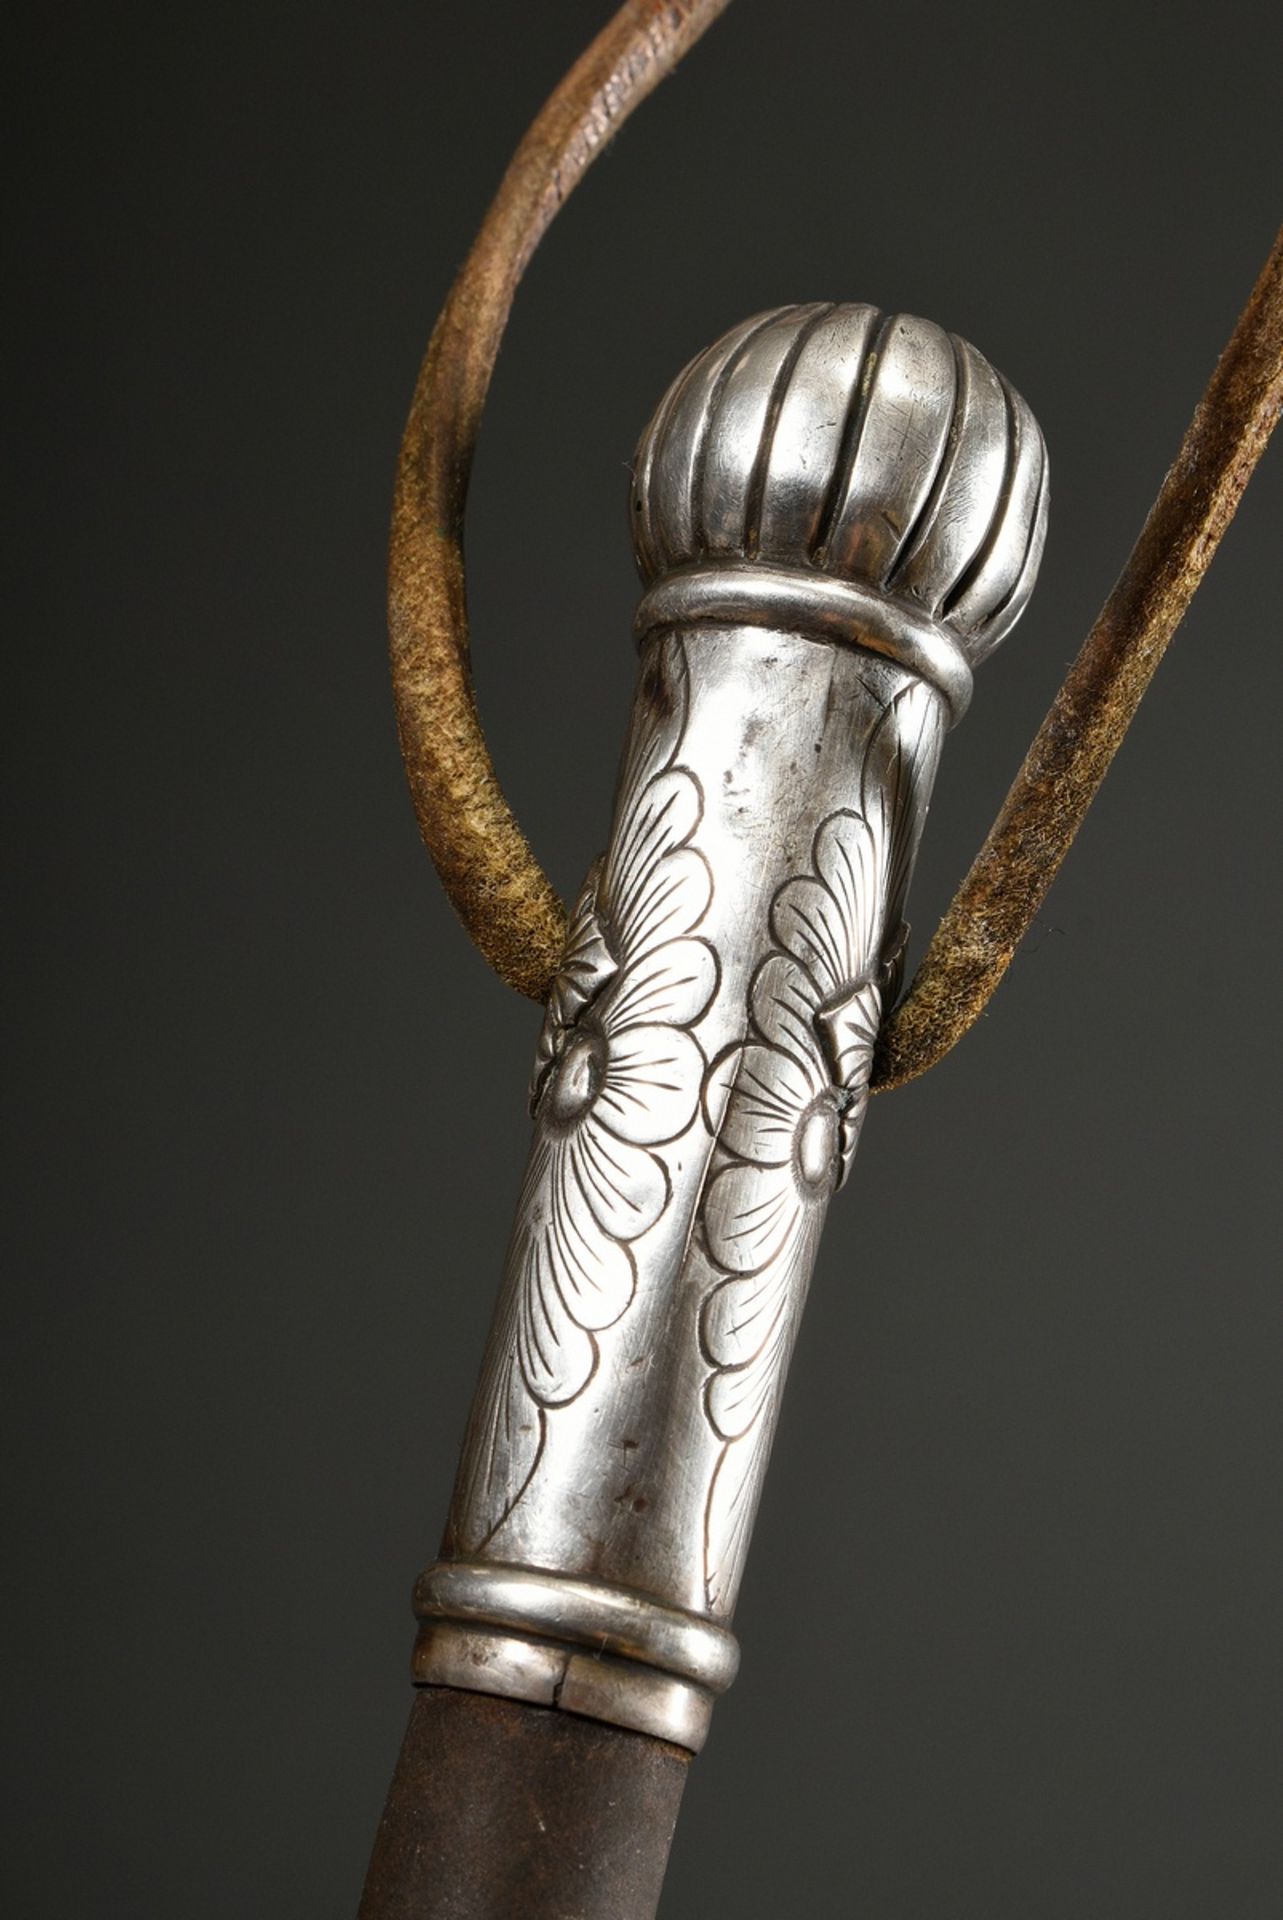 South American gaucho whip so-called Rebenque, leather with florally embossed silver cuffs and hand - Image 5 of 5